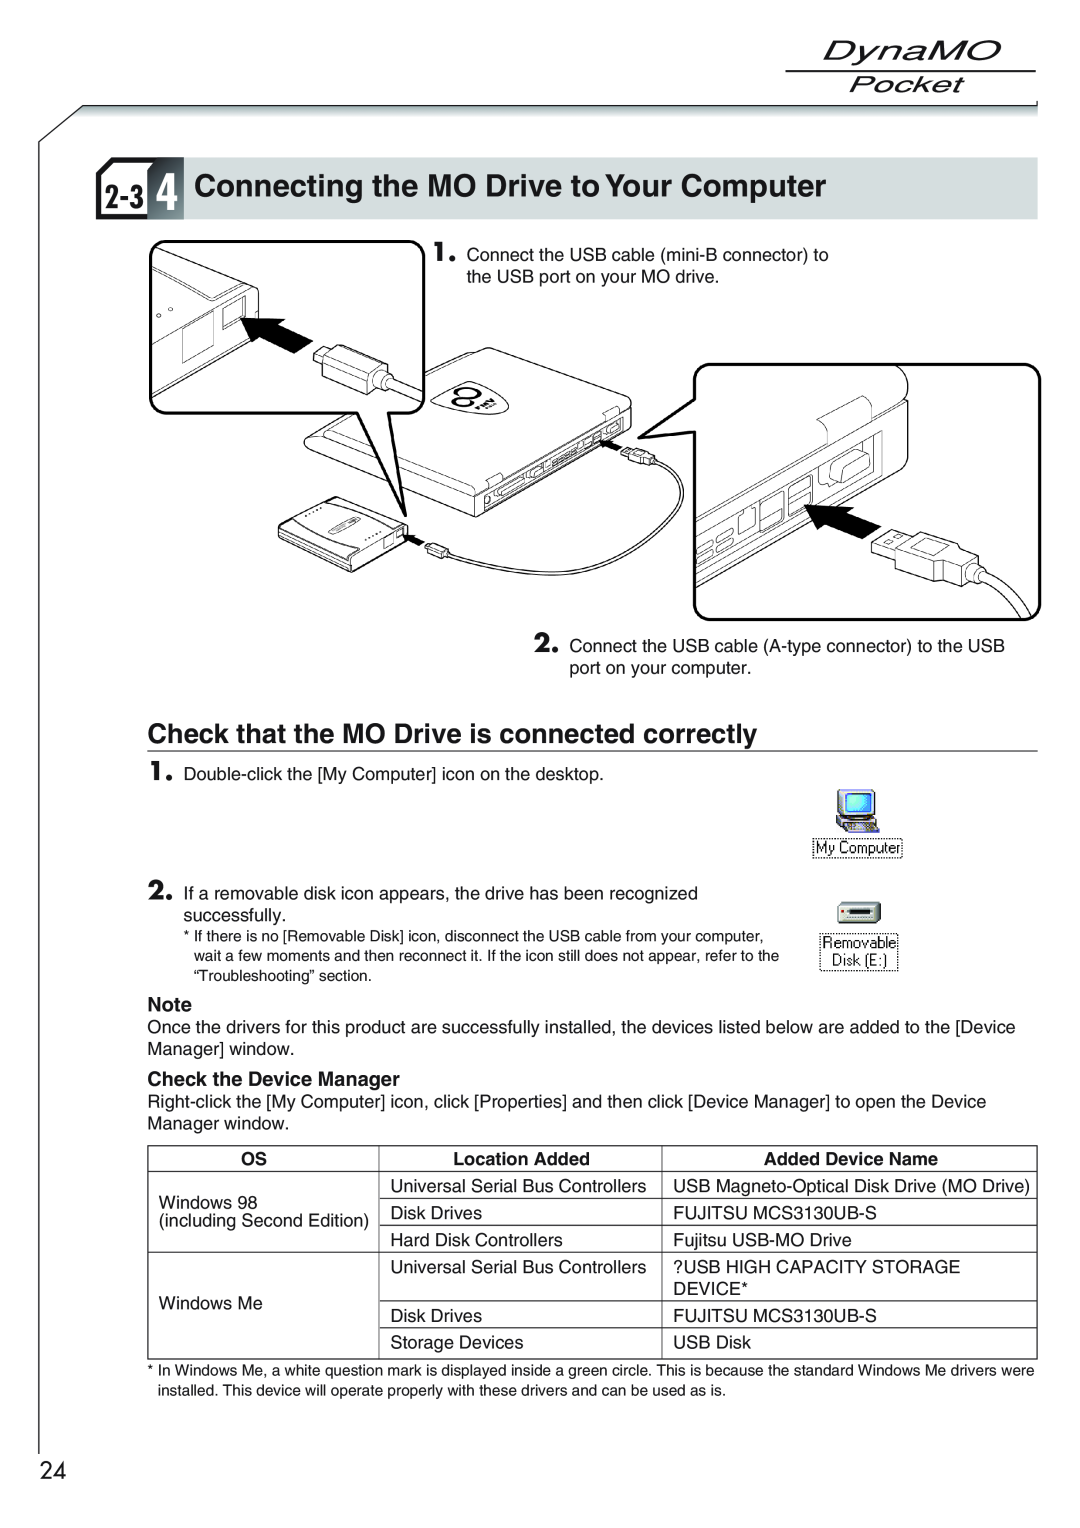 Fujitsu 1300U2 user manual 2-3 4 Connecting the MO Drive to Your Computer, Check that the MO Drive is connected correctly 